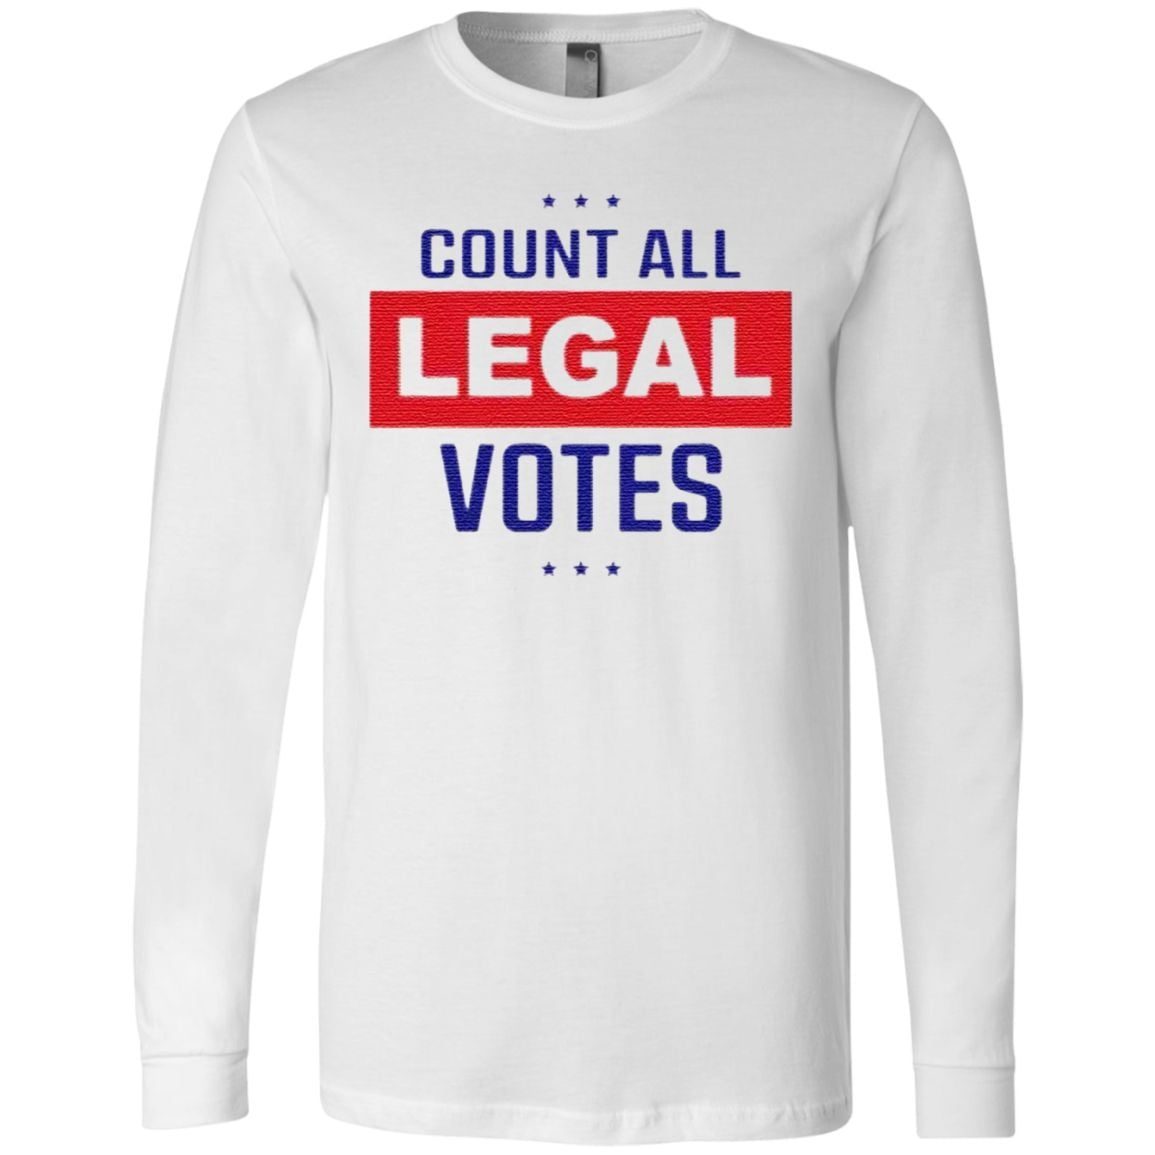 count all legal votes t shirt